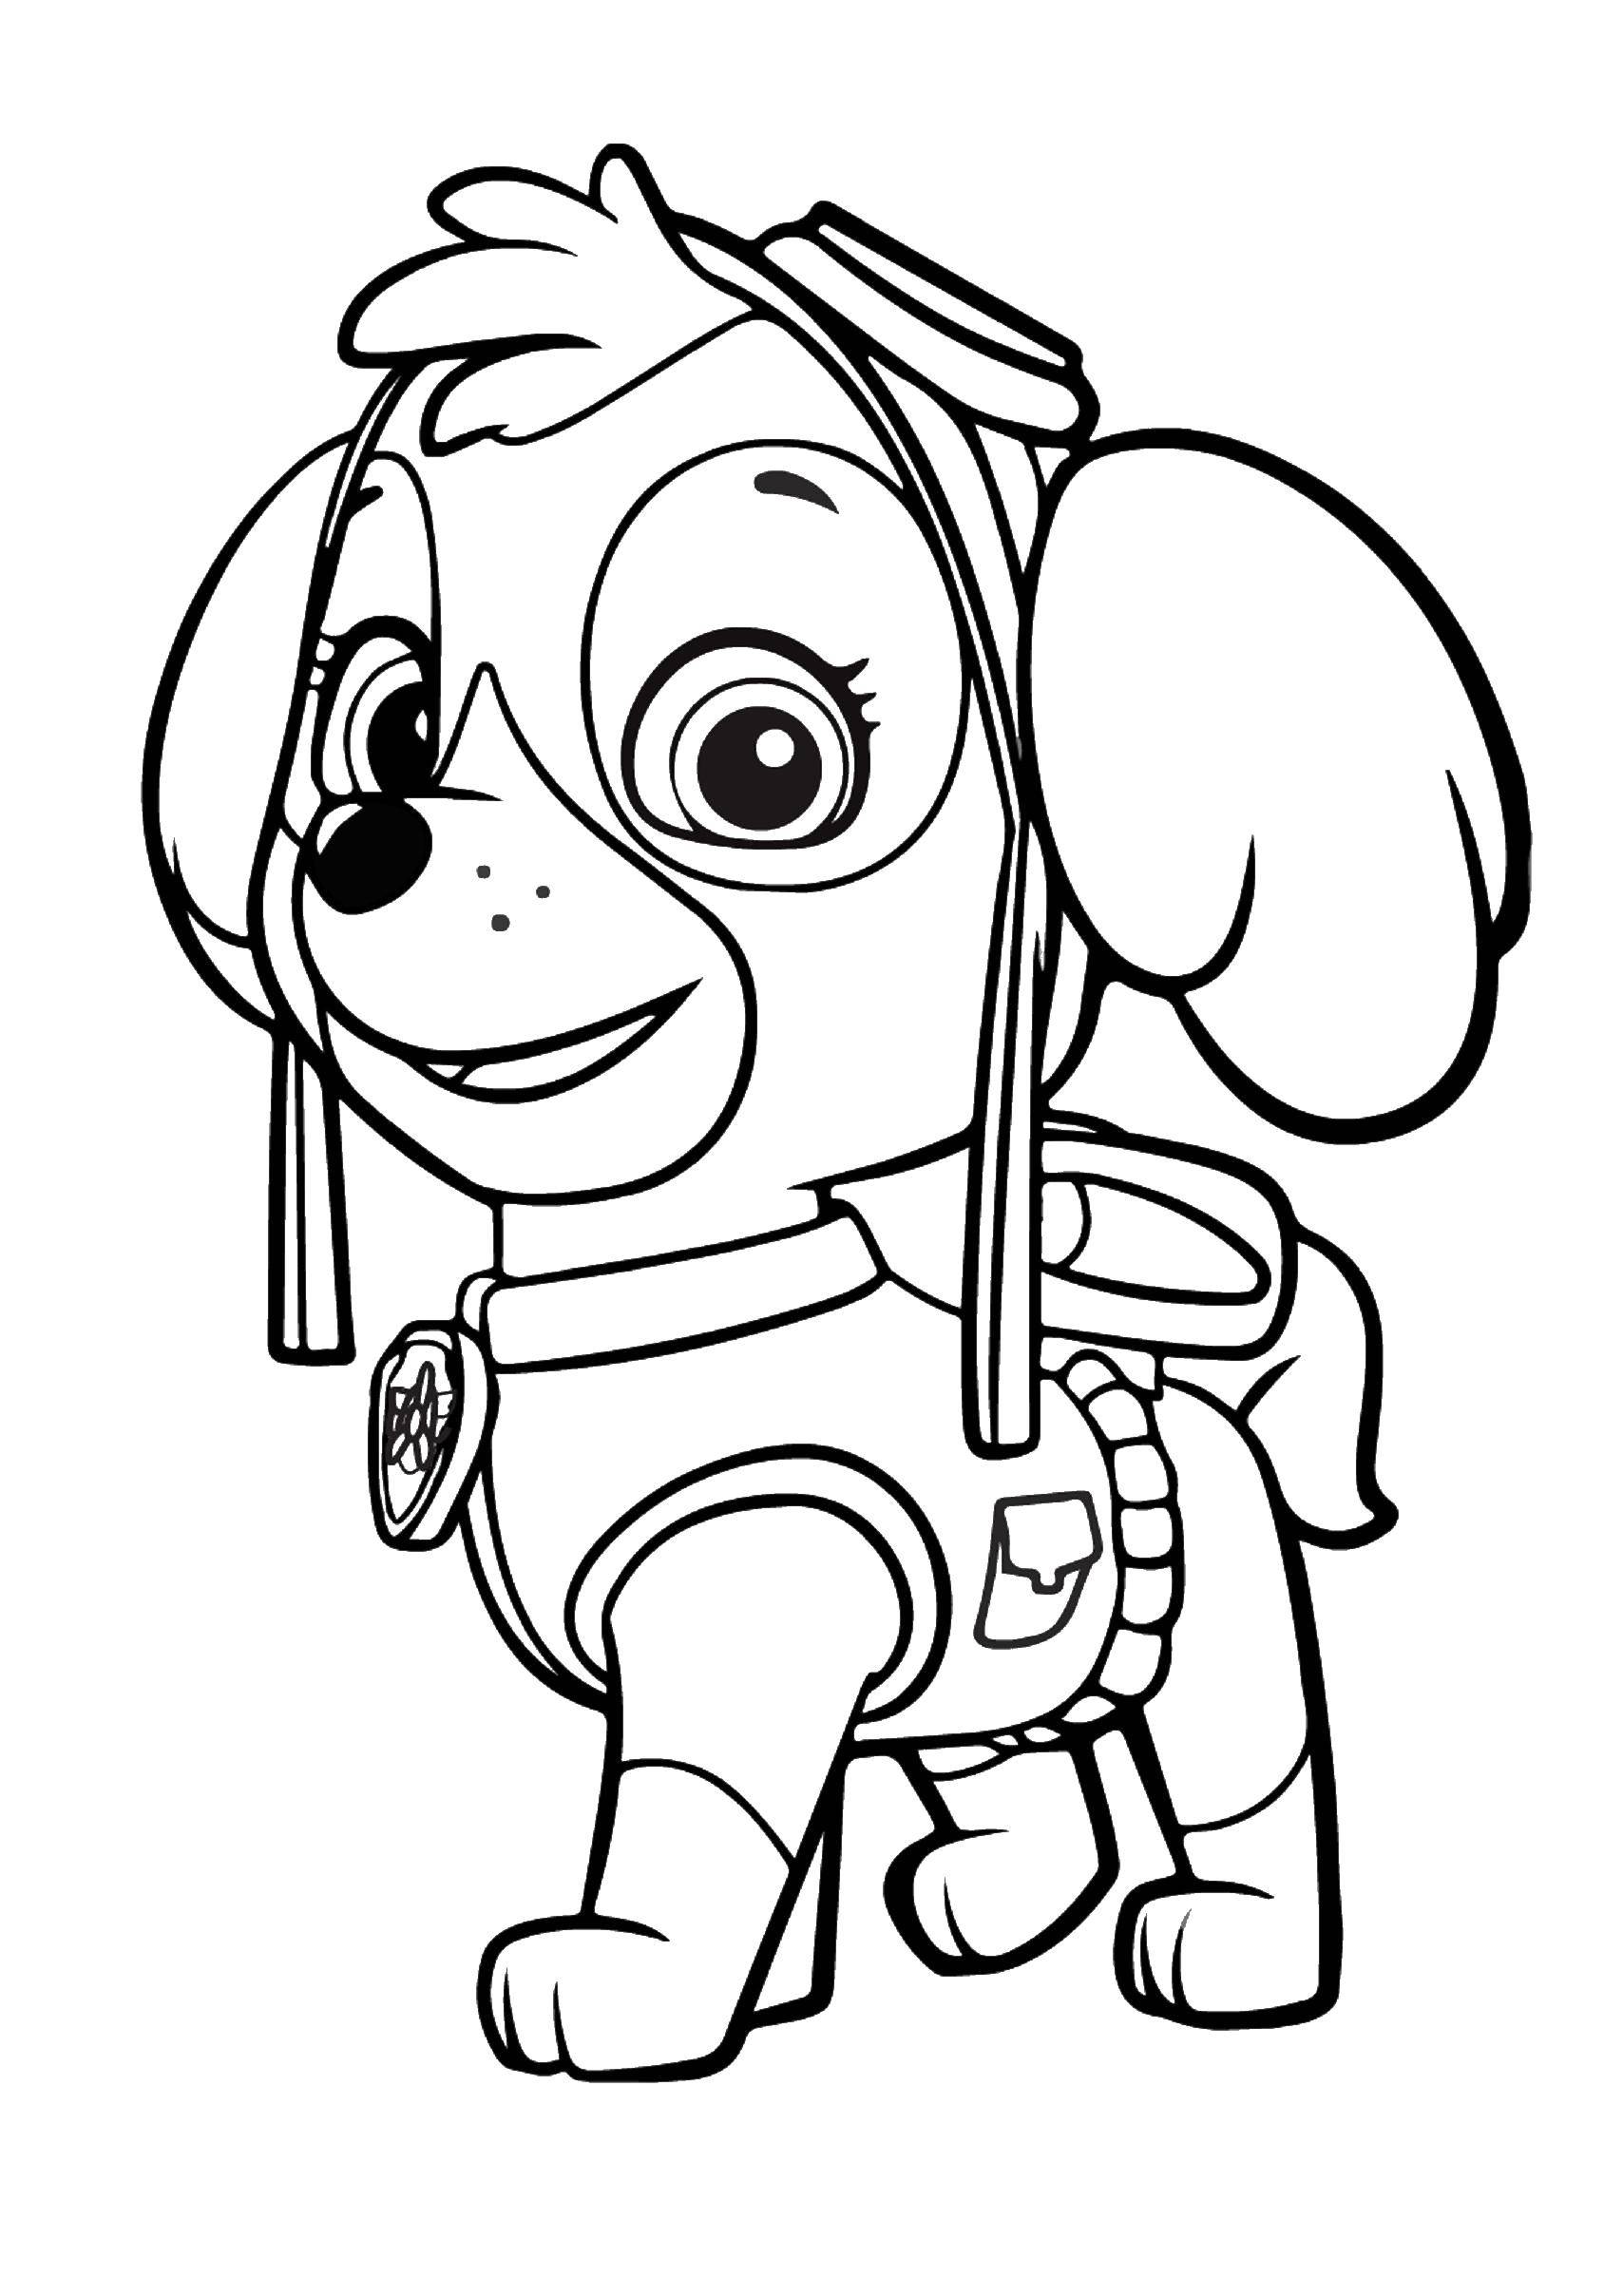 Coloring Paw patrol. Category Cartoon character. Tags:  sky.